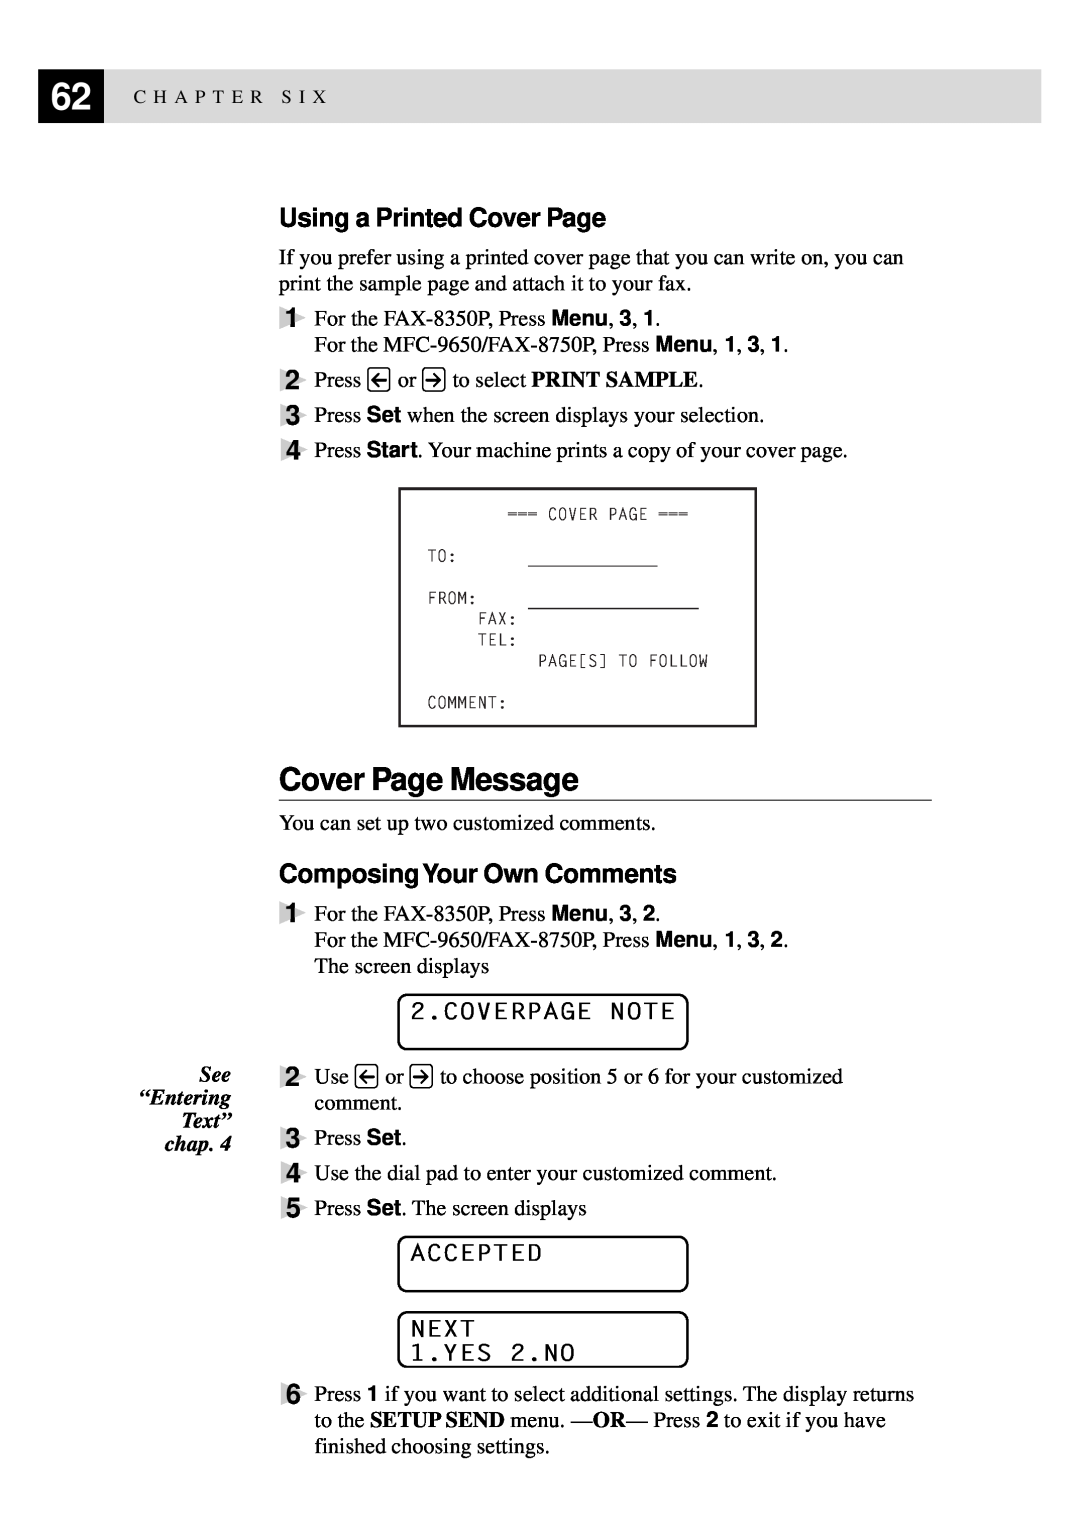 Brother FAX-8350P, MFC-9650 Cover Page Message, Using a Printed Cover Page, ComposingYour Own Comments, Coverpage Note 